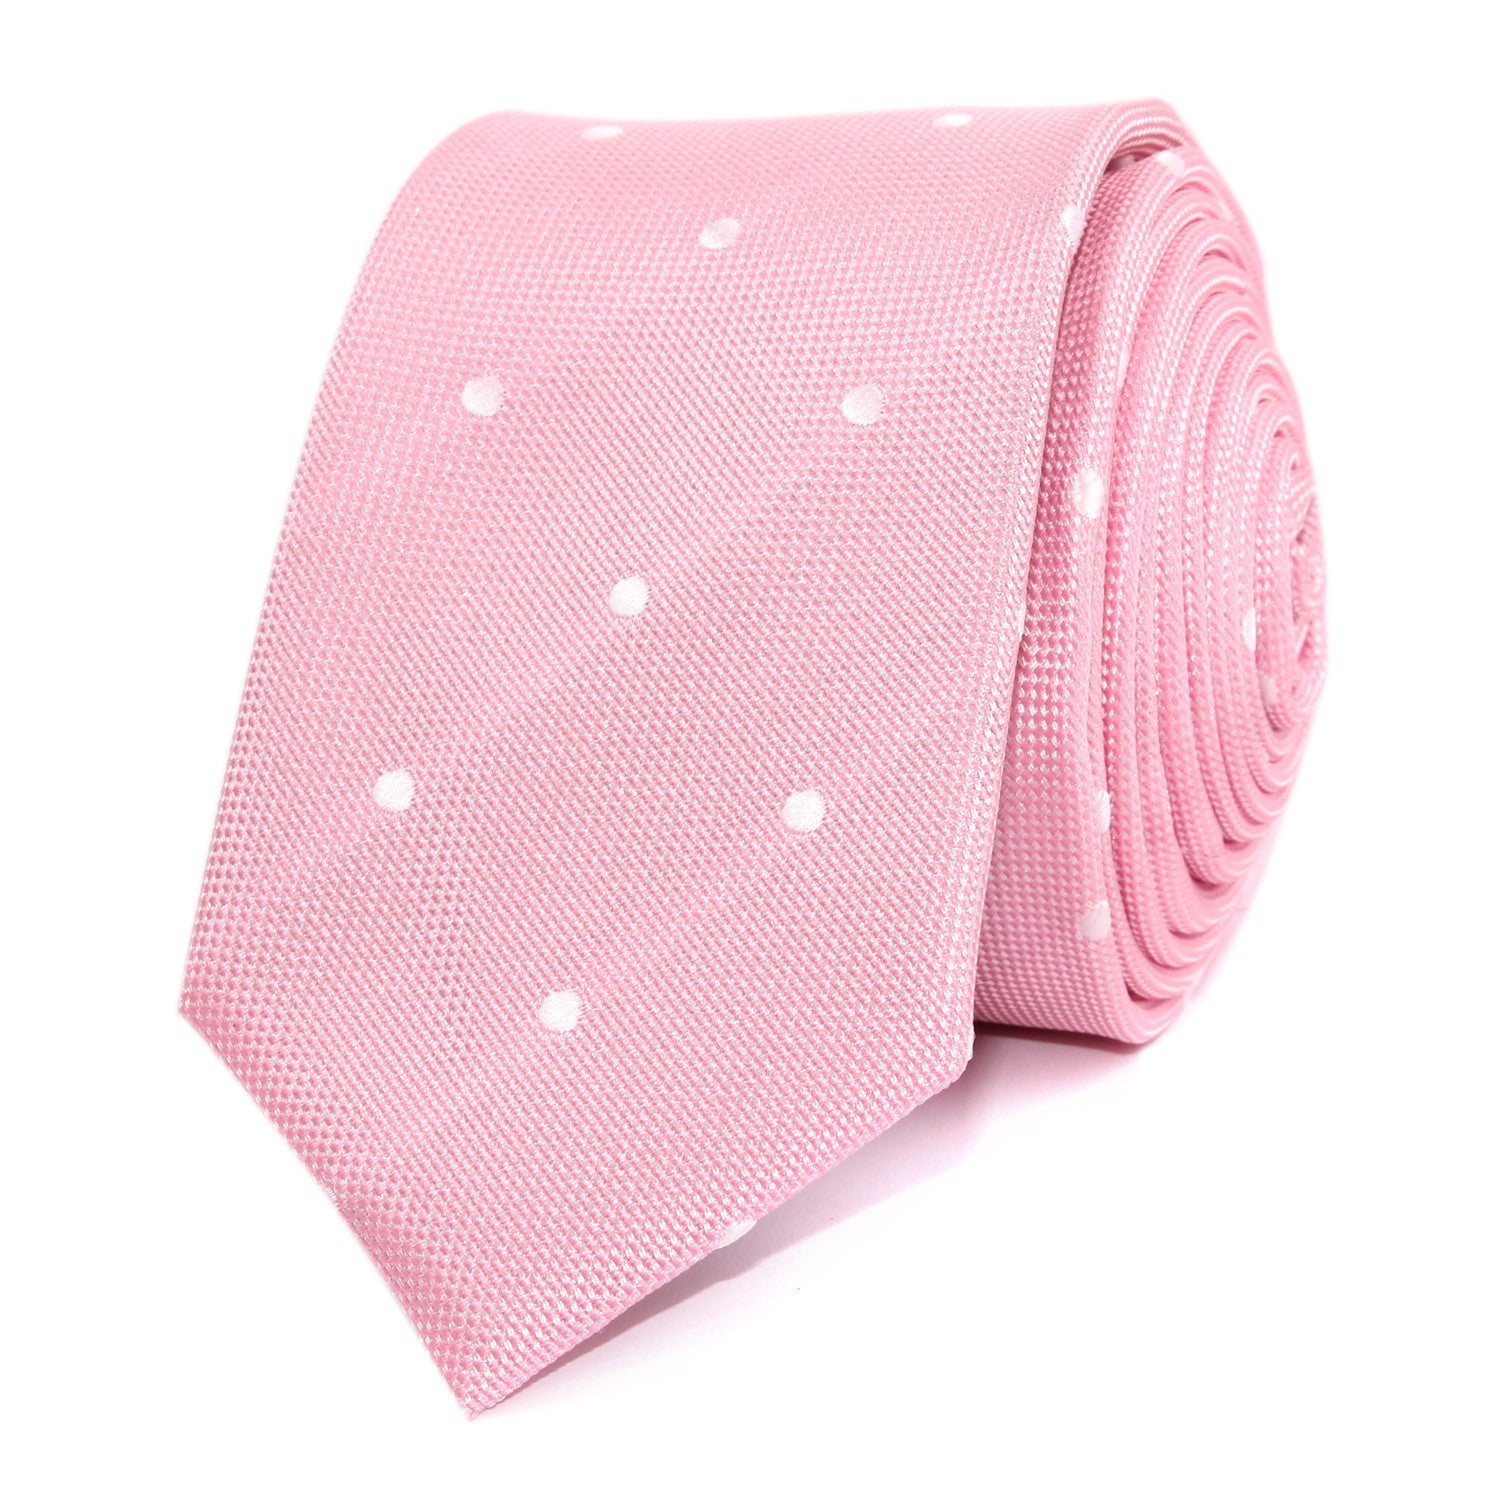 Baby Pink with White Polka Dots Skinny Tie Front